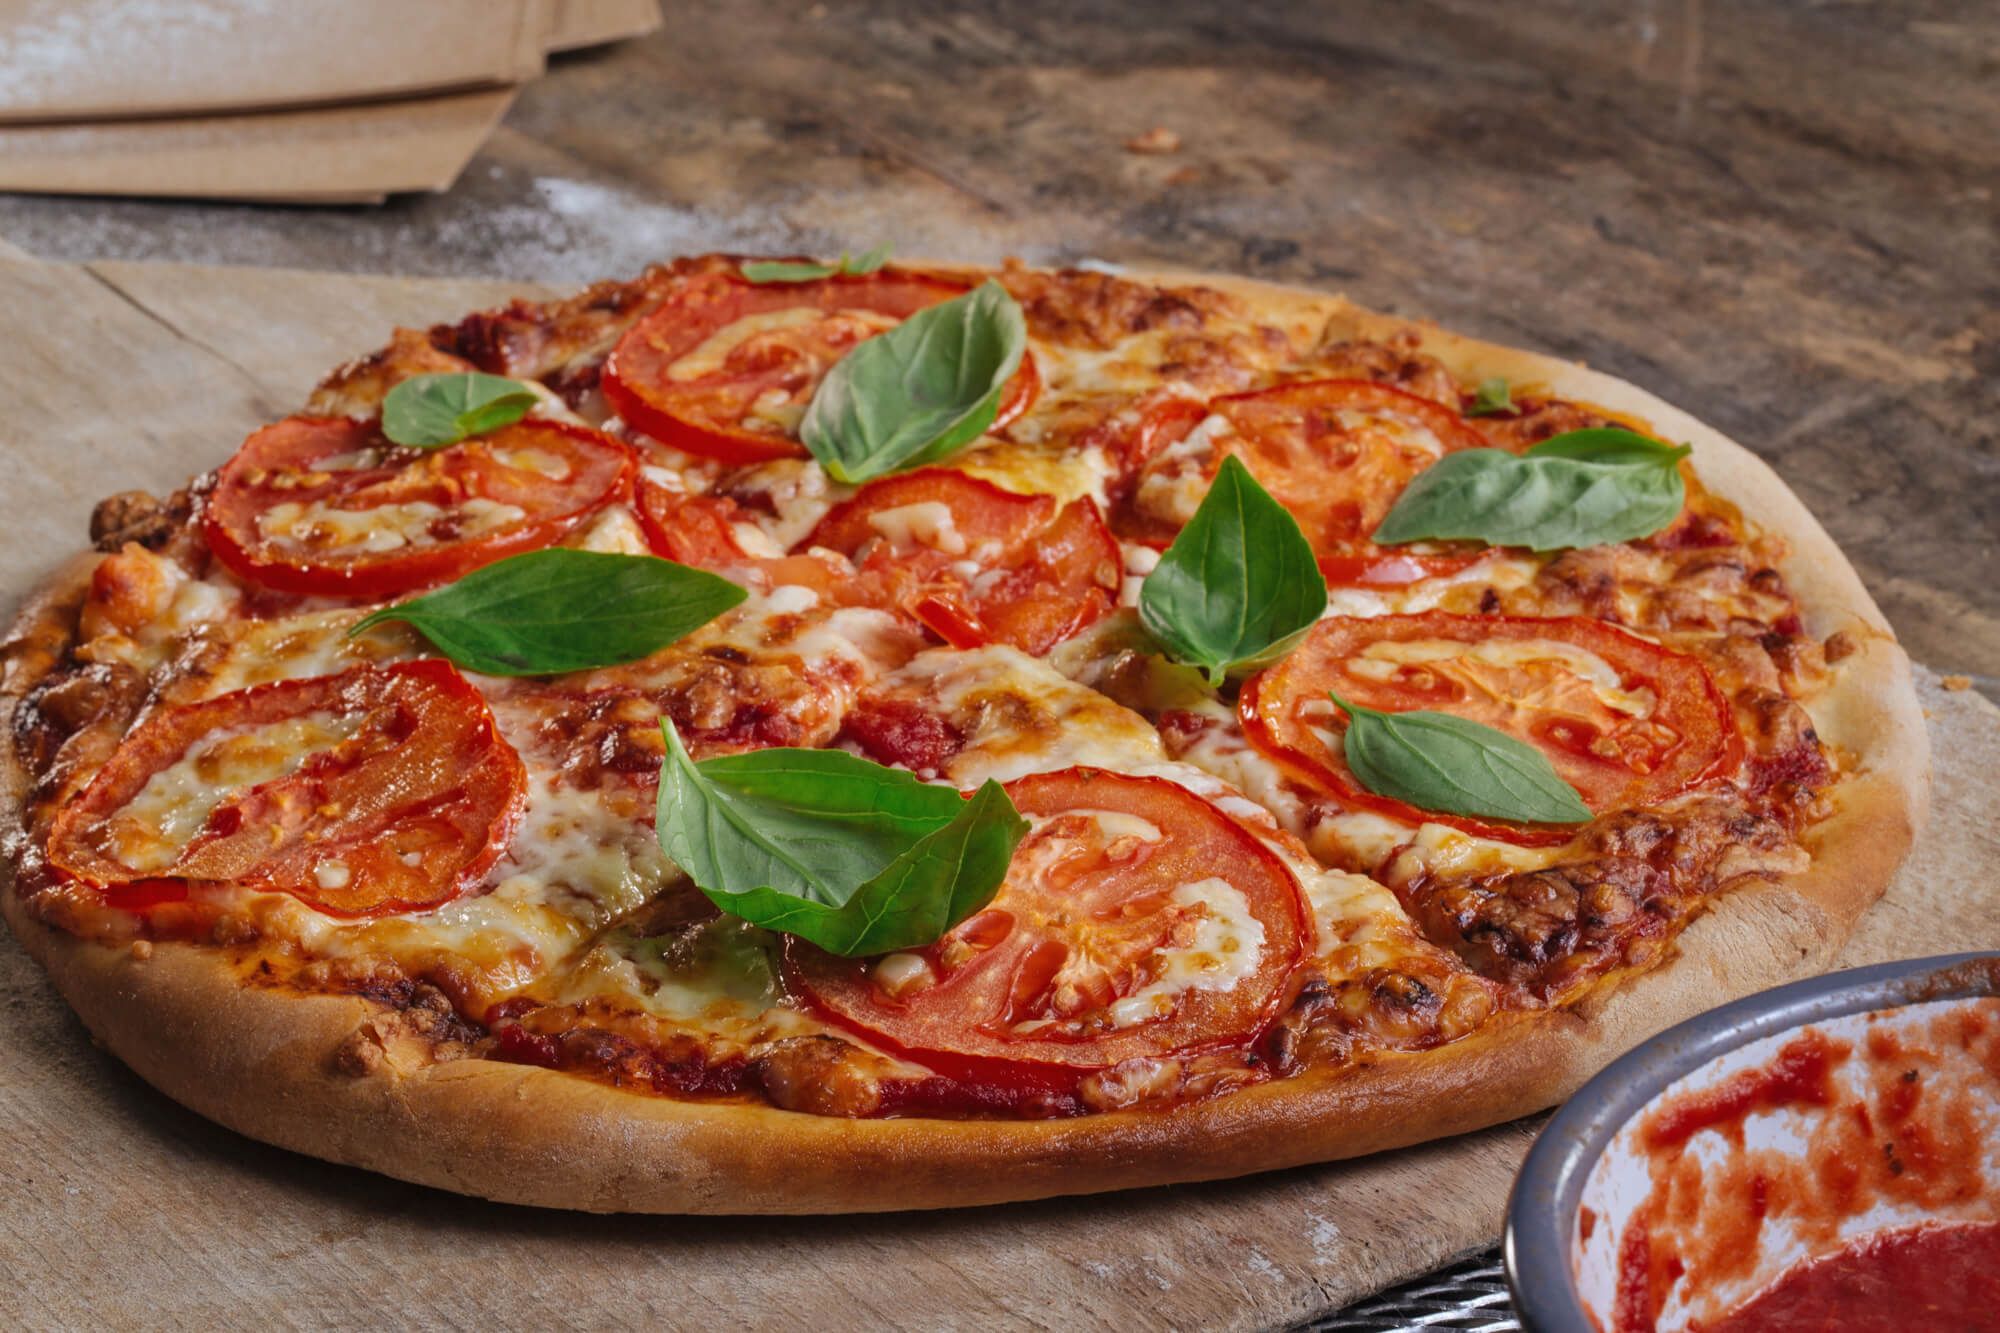 A delicious pizza topped with fresh tomatoes and basil on a rustic wooden cutting board.